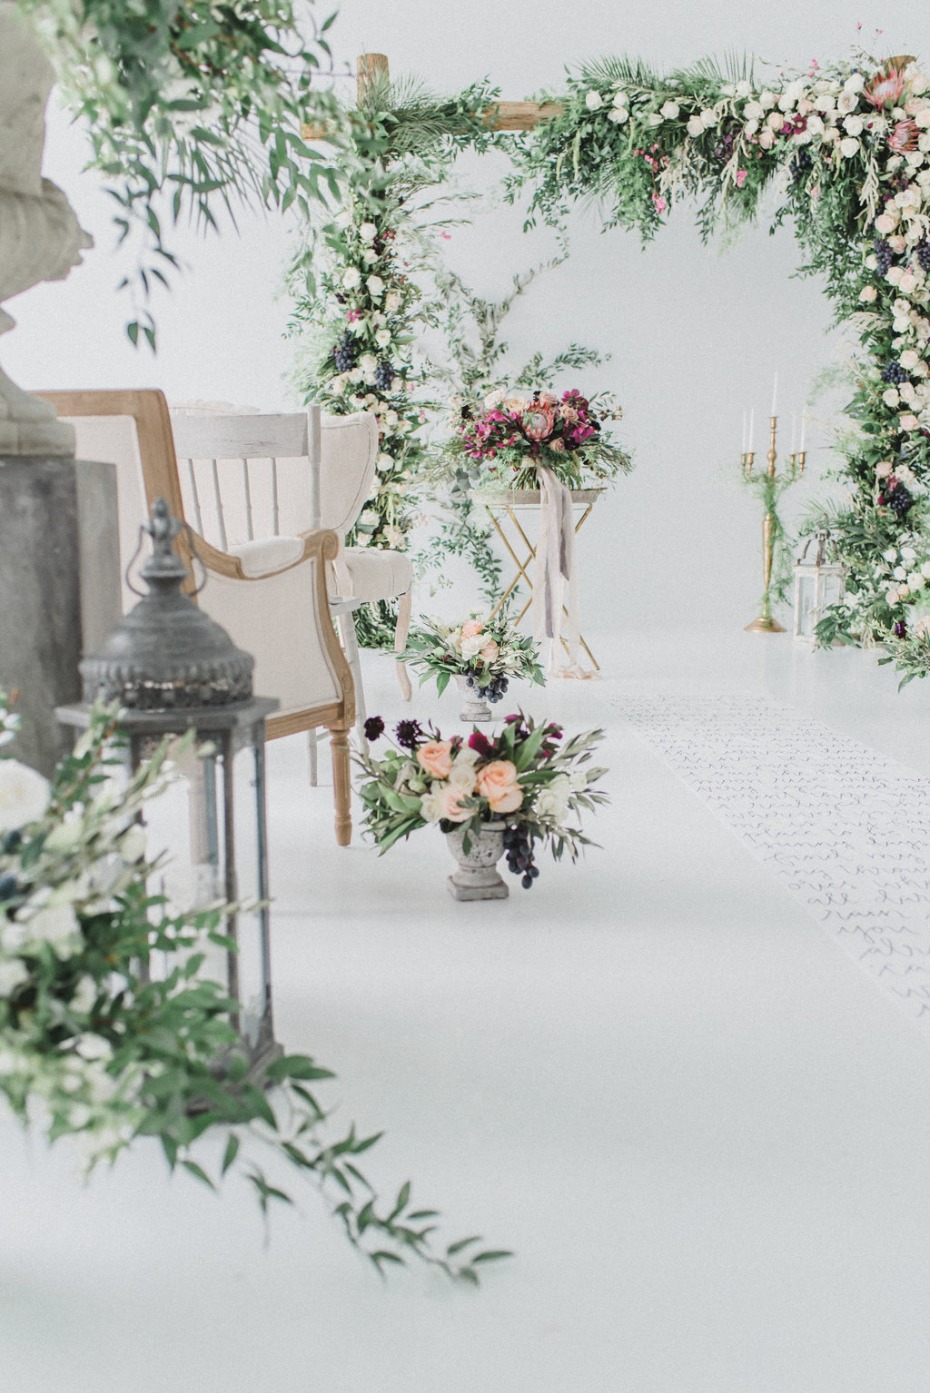 Keep your aisle decor simple and chic